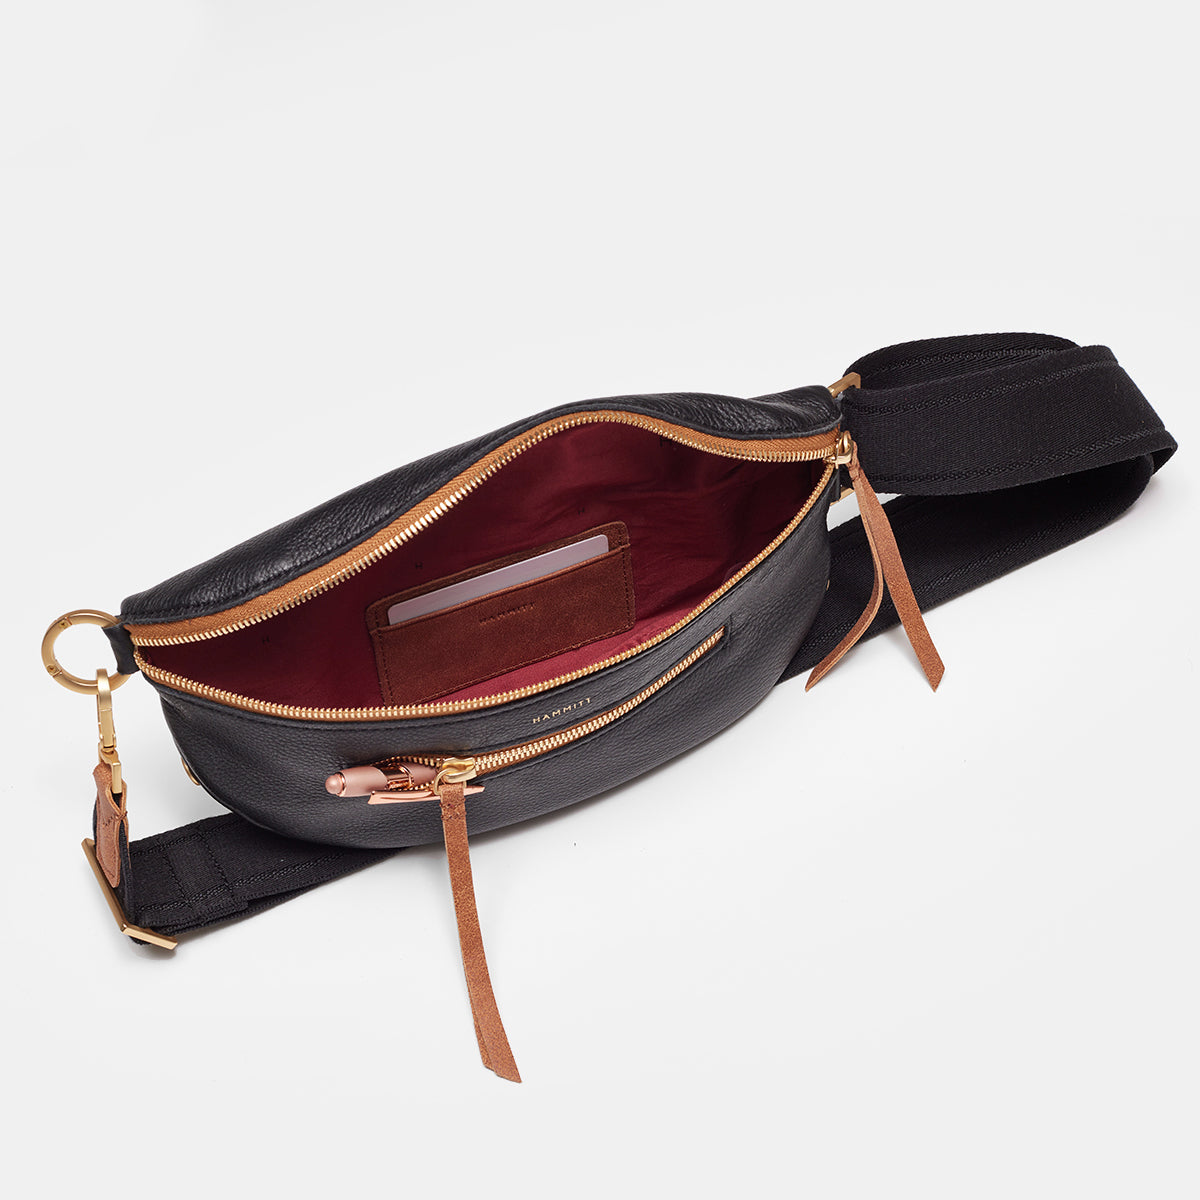 Charles-Crossbody-Med-North-End-Inside-View